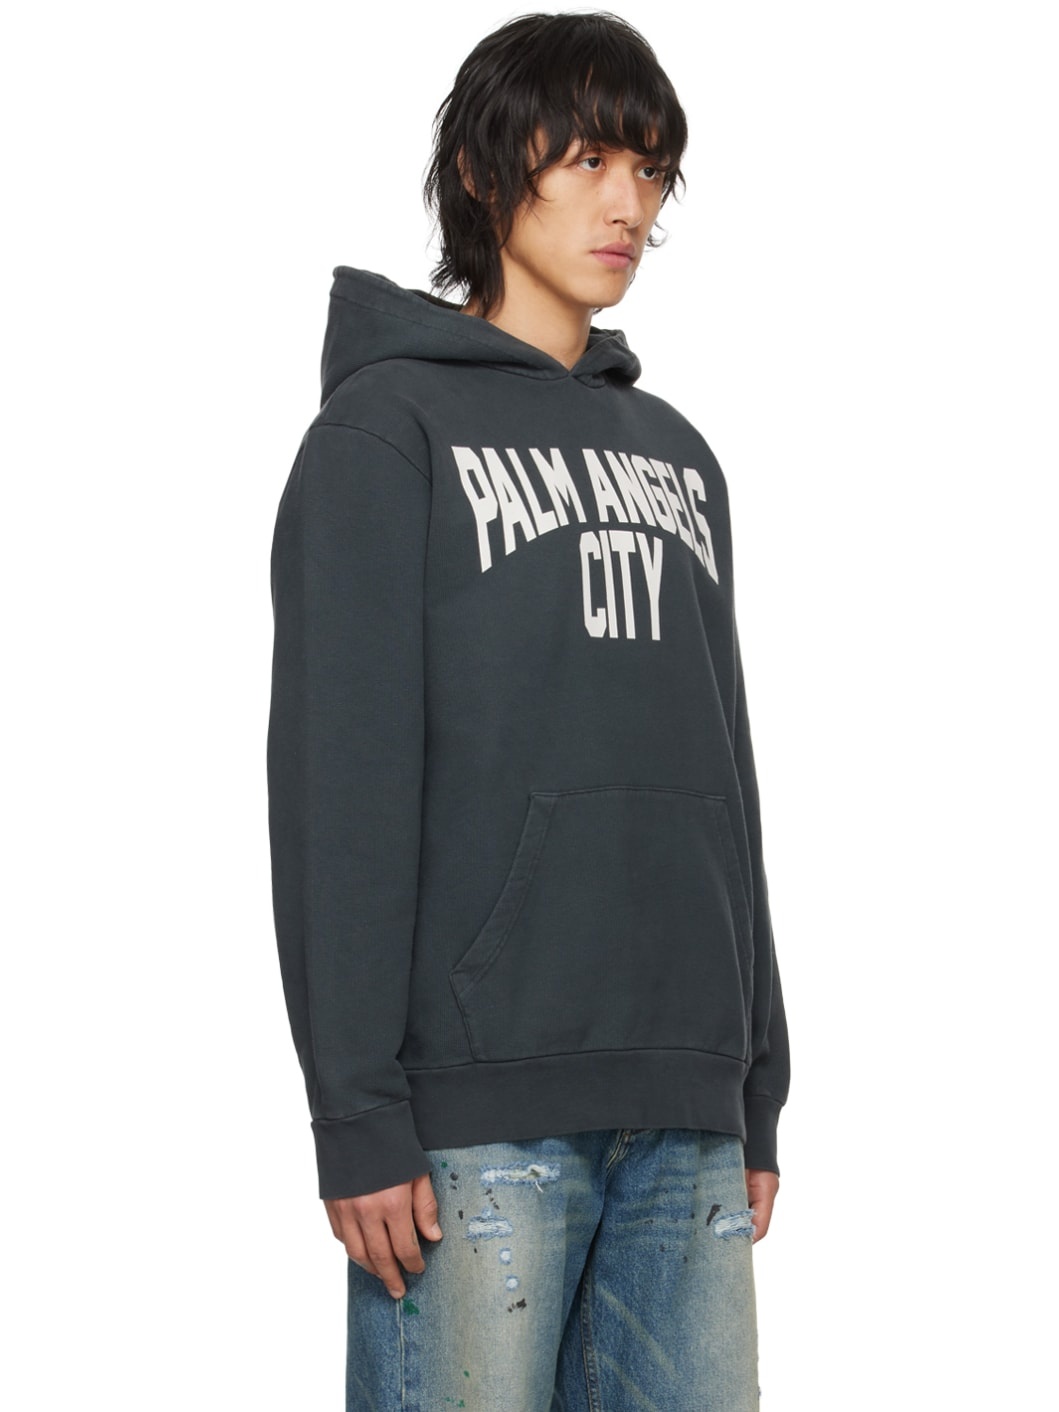 Gray City Washed Hoodie - 2